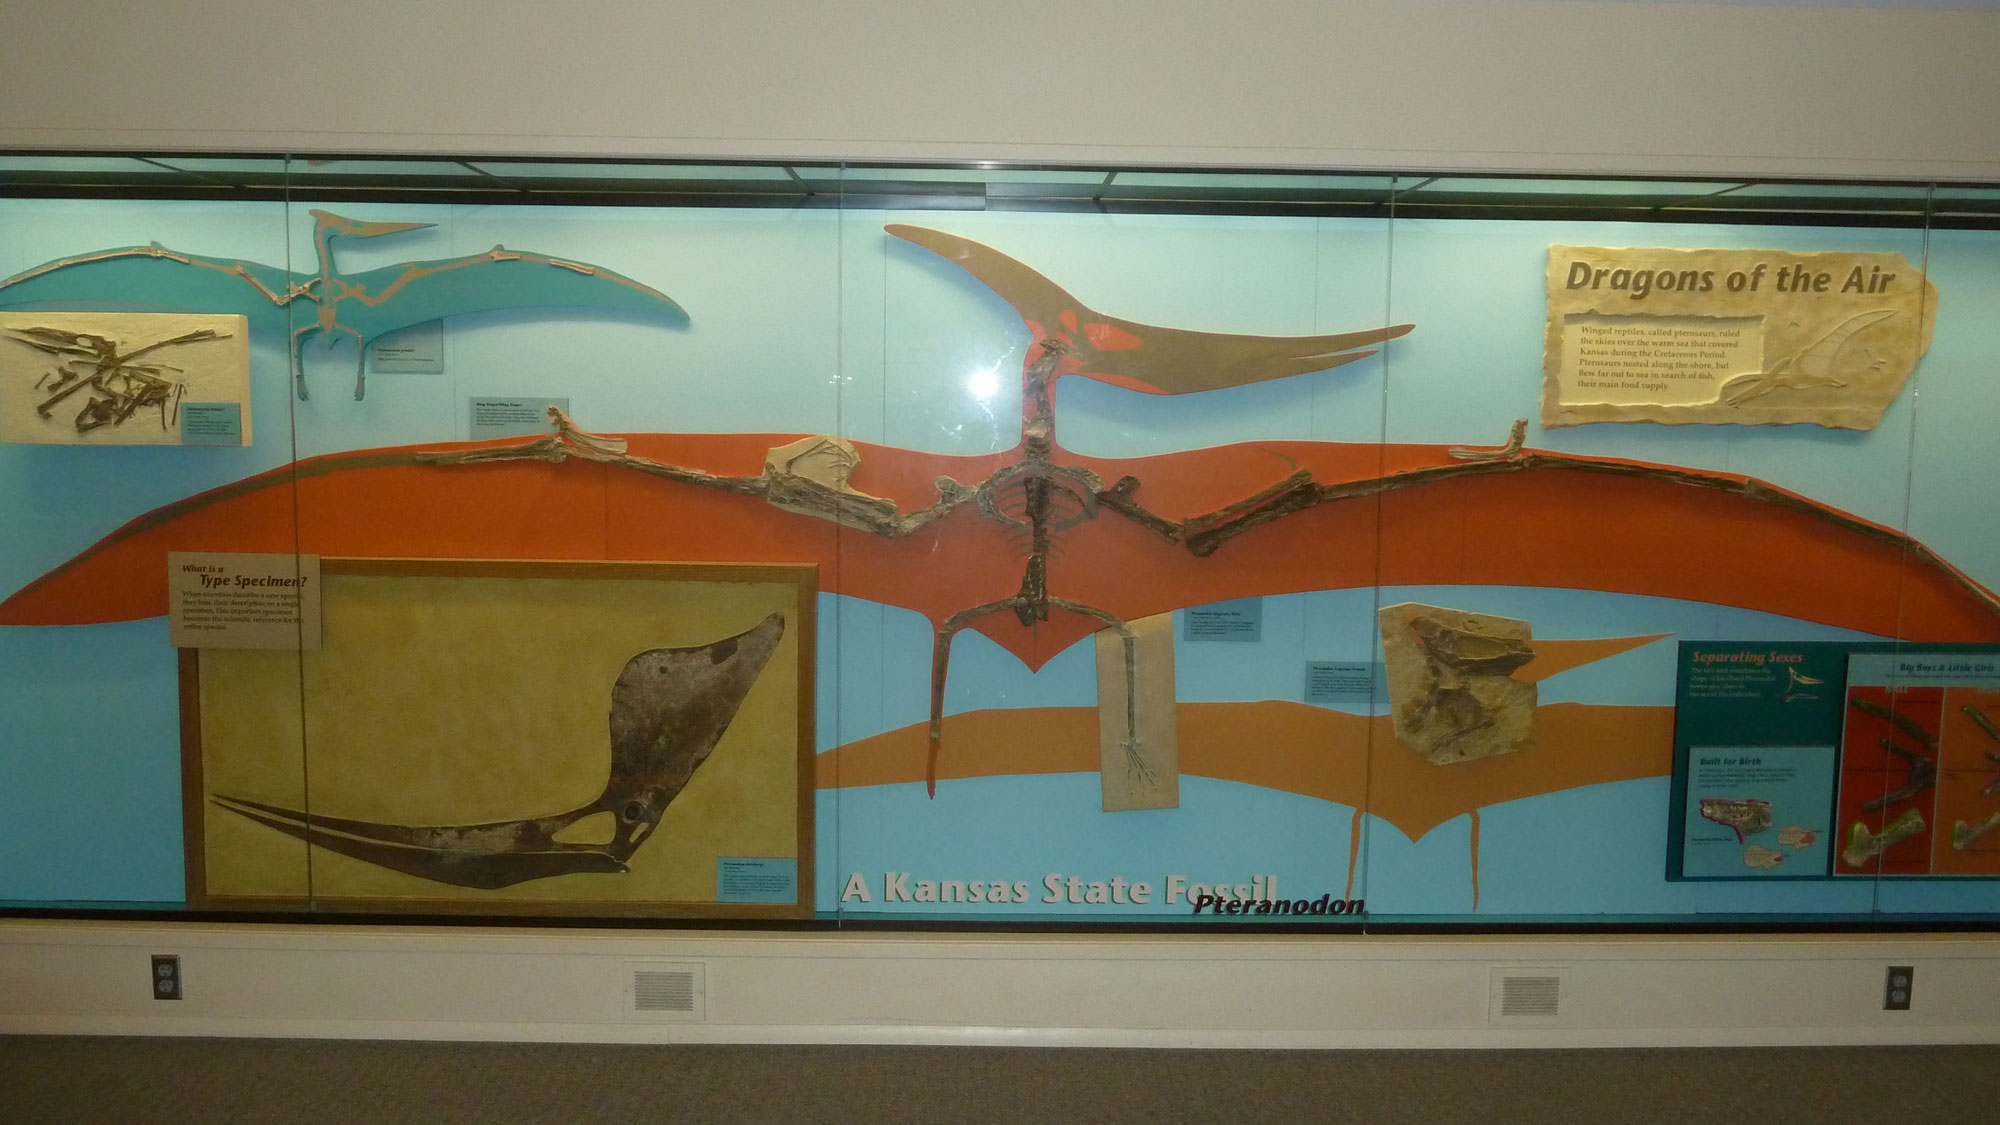 Partial skeleton of Pteranodon on display at the Sternberg Museum of Natural History in Hays, Kansas.